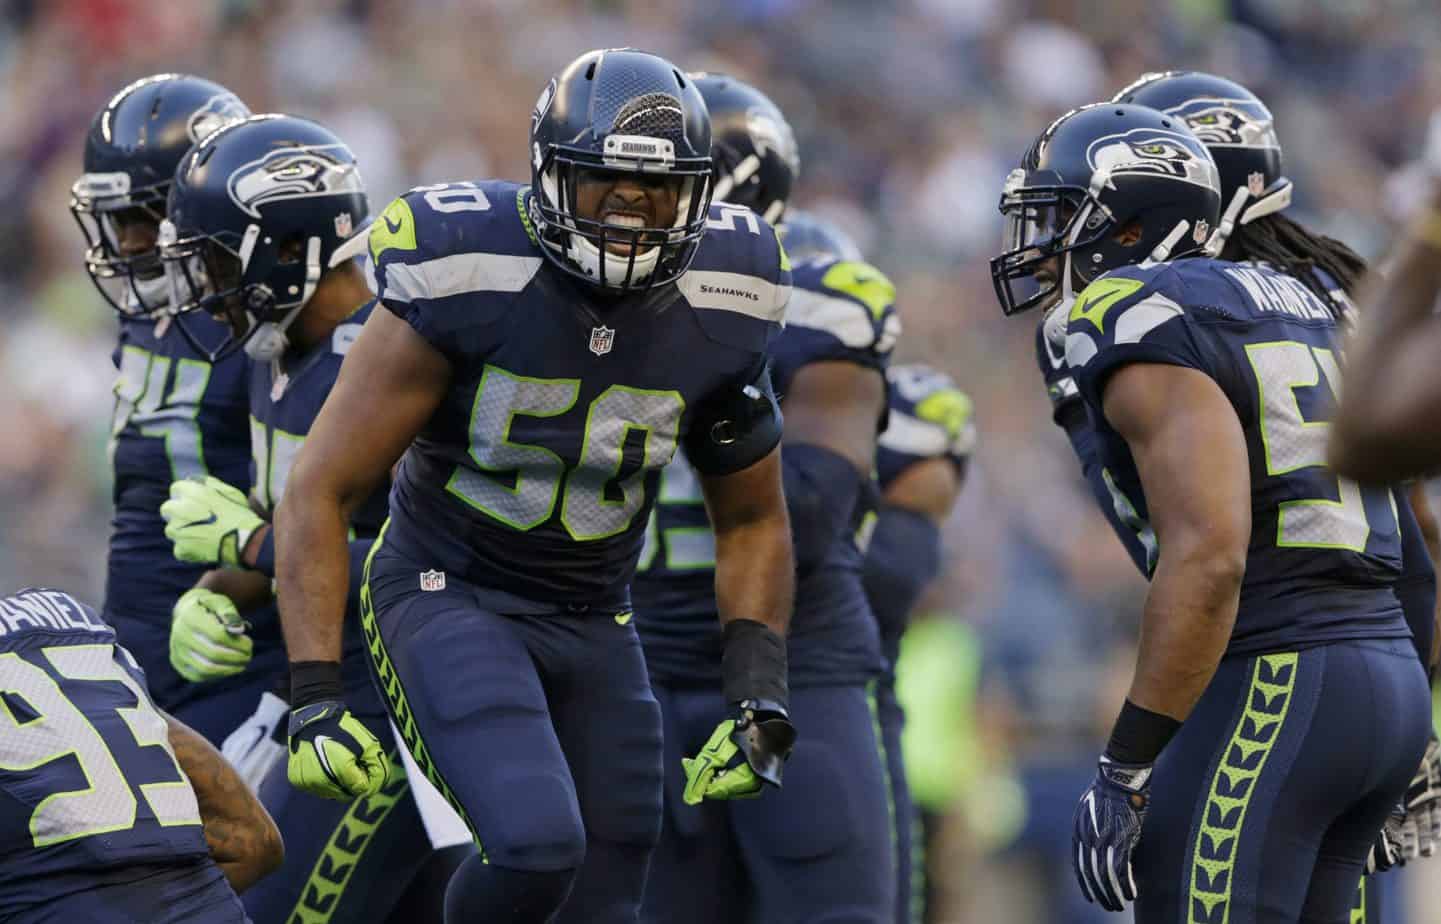 Seattle Seahawks linebacker KJ Wright took to Twitter to slam the NFL for pushing back the game against the Rams due to an outbreak with LA